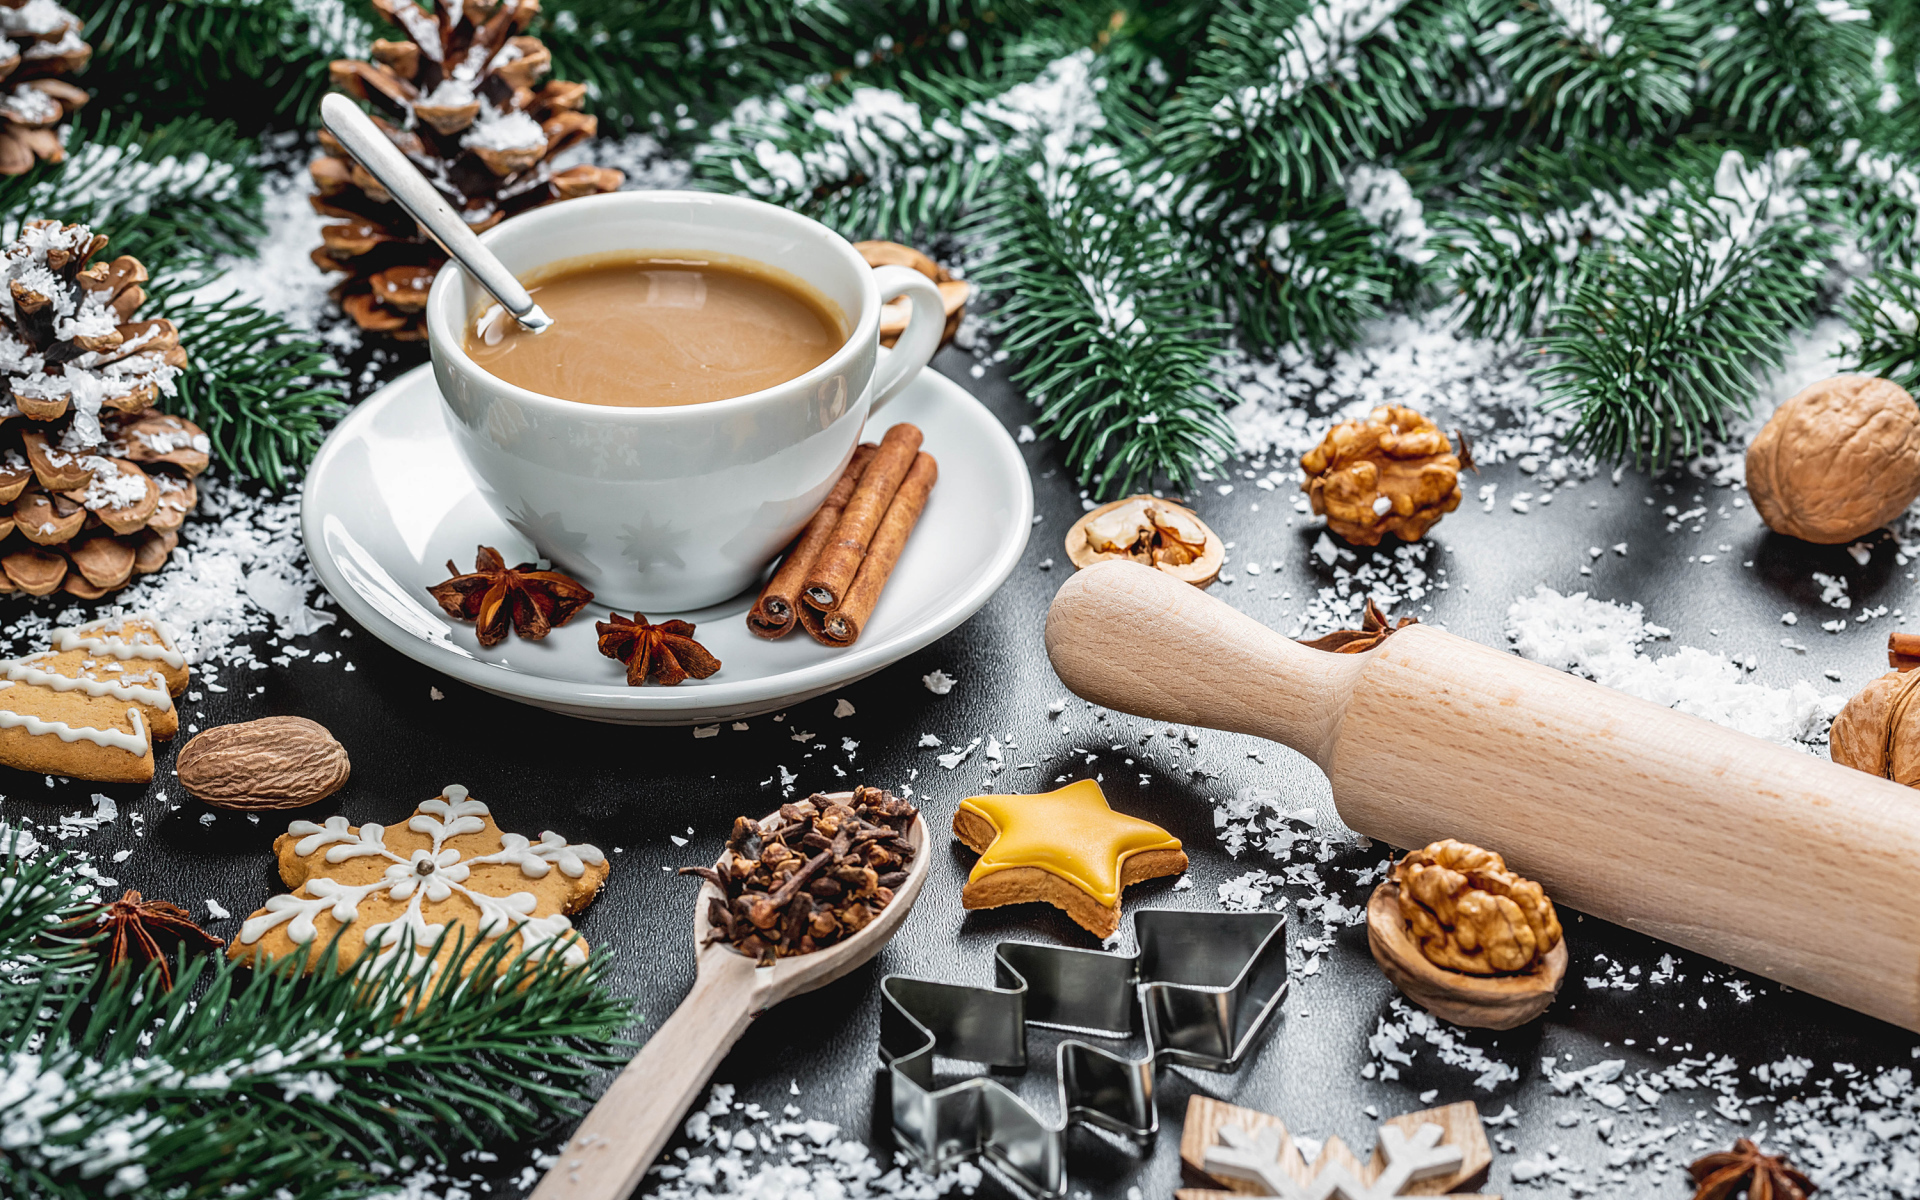 A cup of hot cocoa on the table with fir branches and nuts